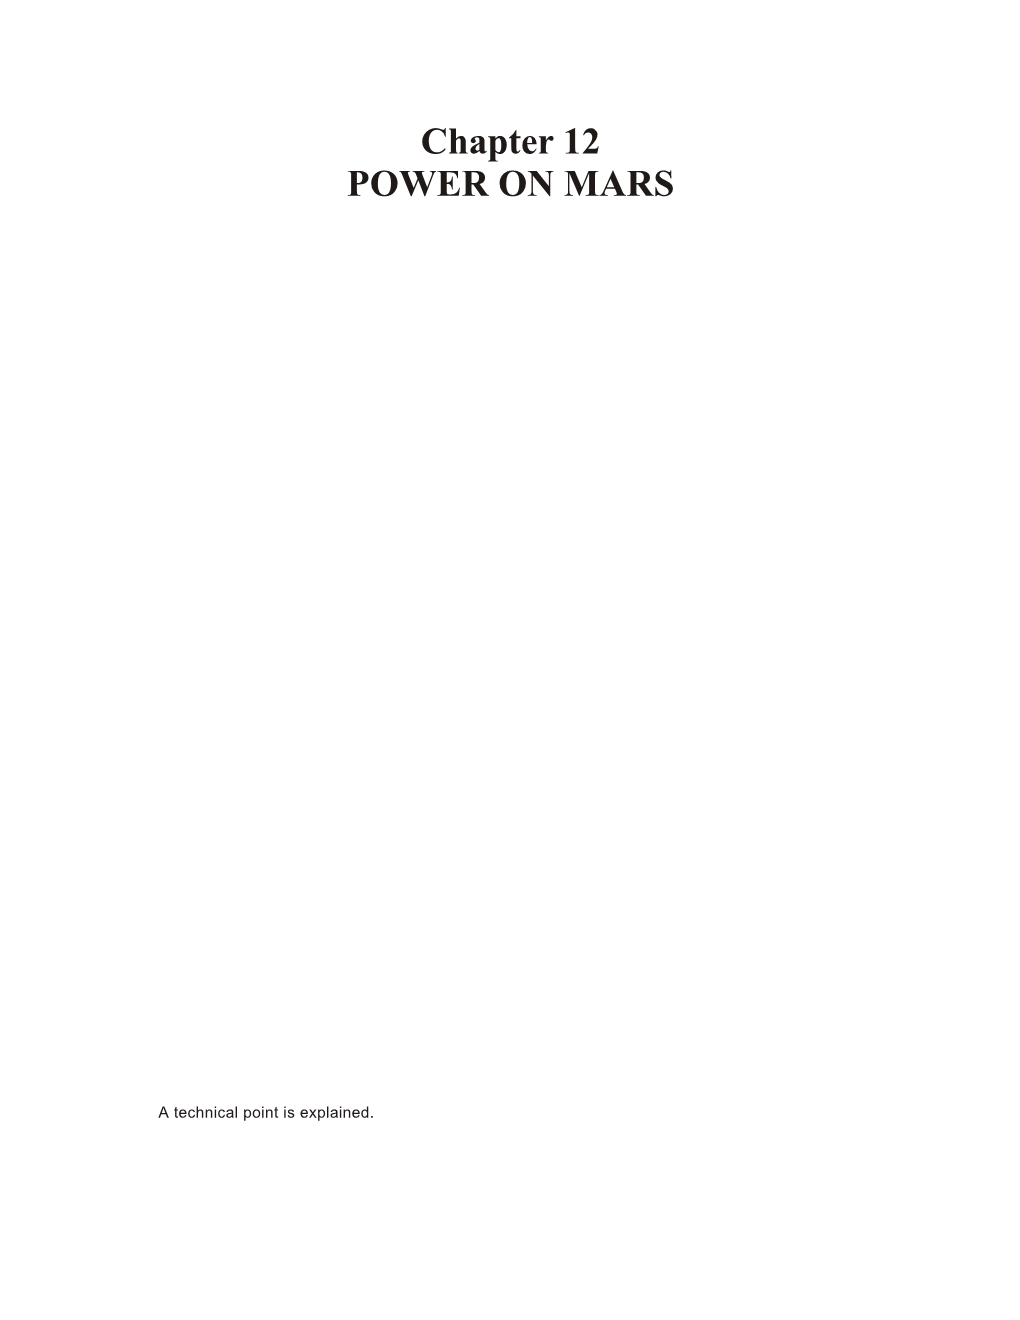 Chapter 12 POWER on MARS